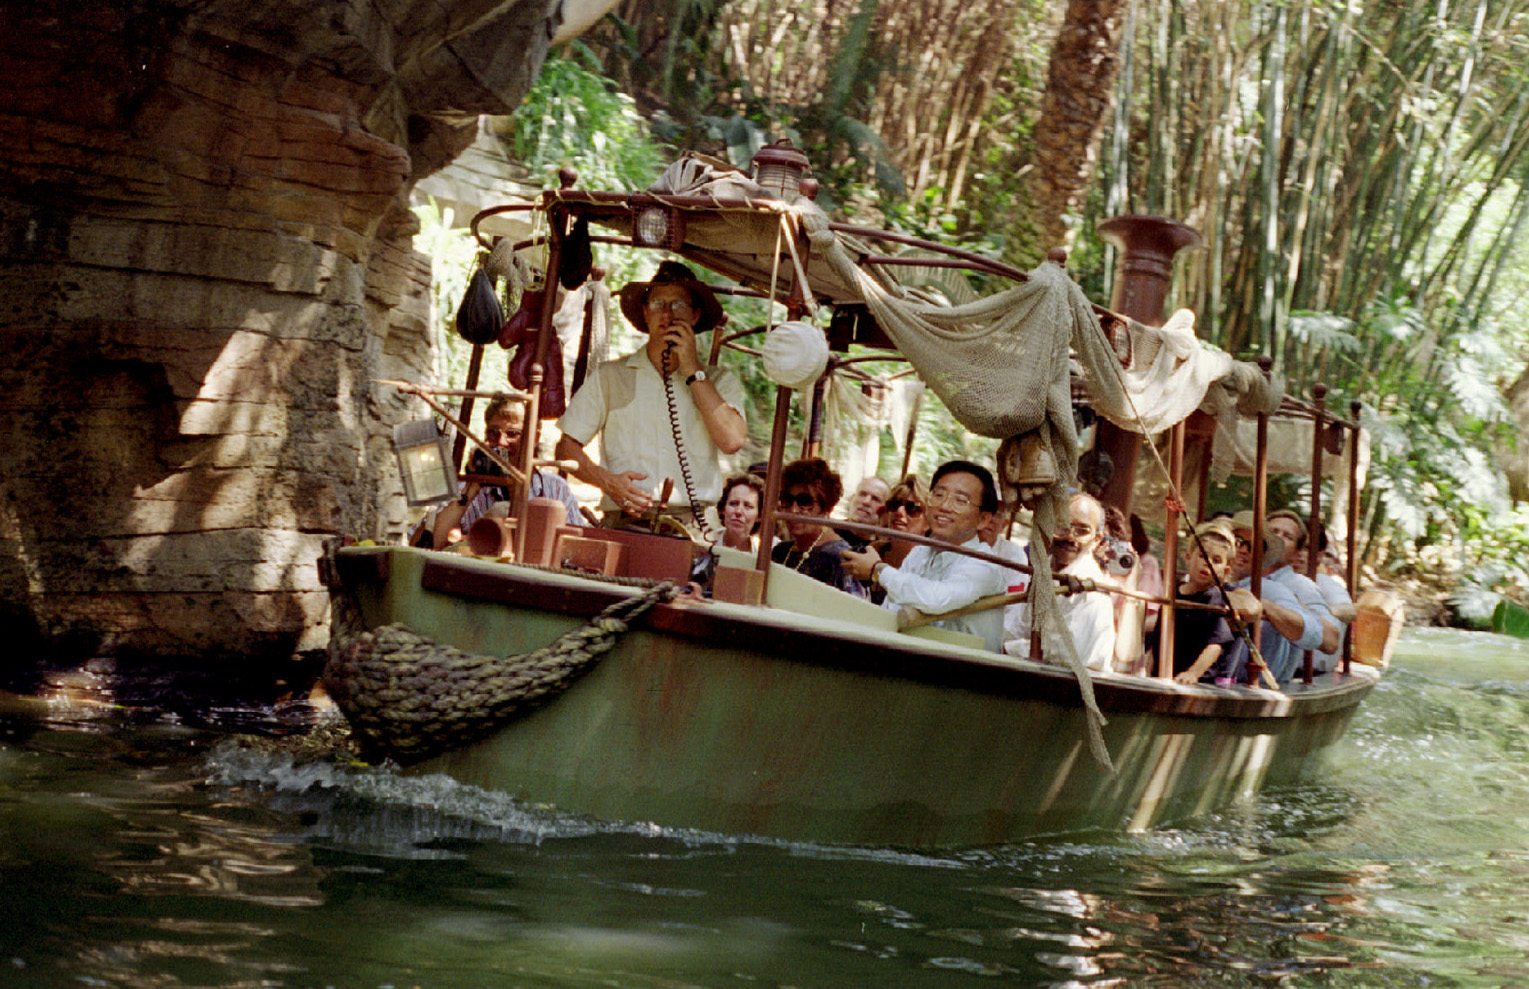 Disney is finally updating its problematic Jungle Cruise ride at Disneyland and Walt Disney World